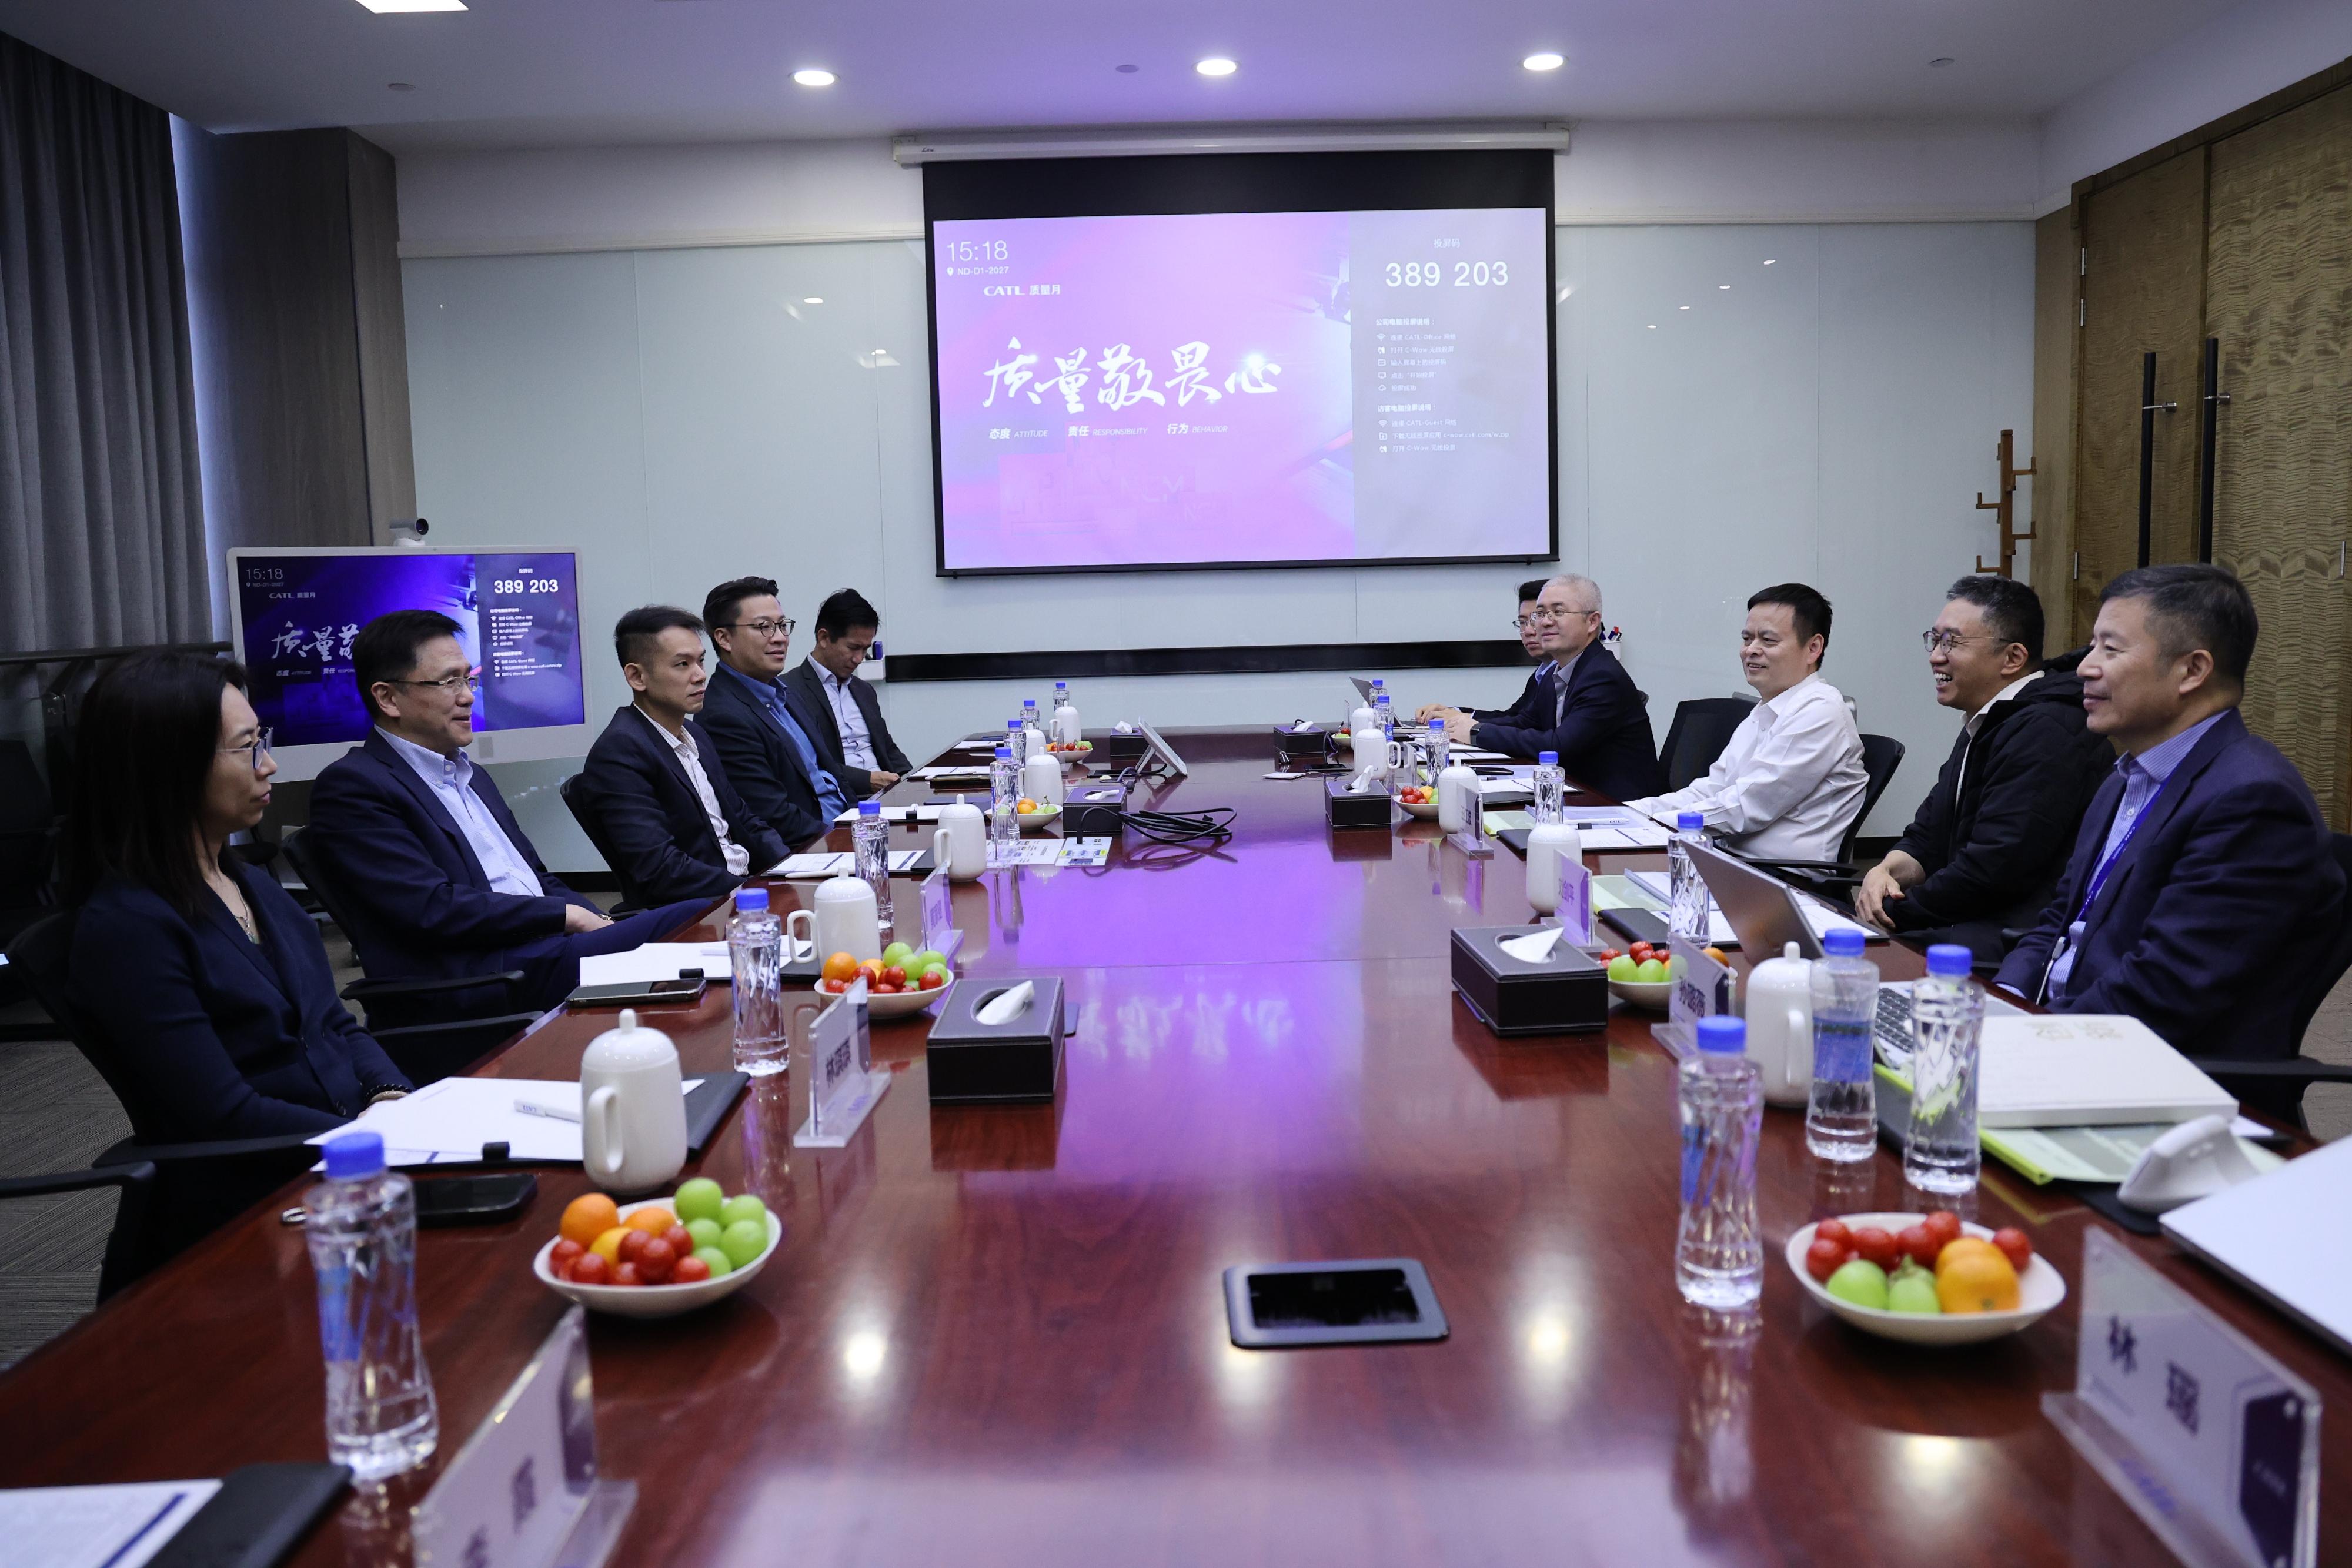 The Secretary for Innovation, Technology and Industry, Professor Sun Dong (second left) today (November 28) meets with the Chief Investment Officer of Contemporary Amperex Technology Co Limited (CATL), Mr Wang Hongbo (second right); the Chairman of the Supervisory Board and the Ecological Development Committee of CATL, Mr Wu Yingming (third right), and other senior executives of CATL to exchange views on the enterprise's direction and strategies to launch its business in Hong Kong.